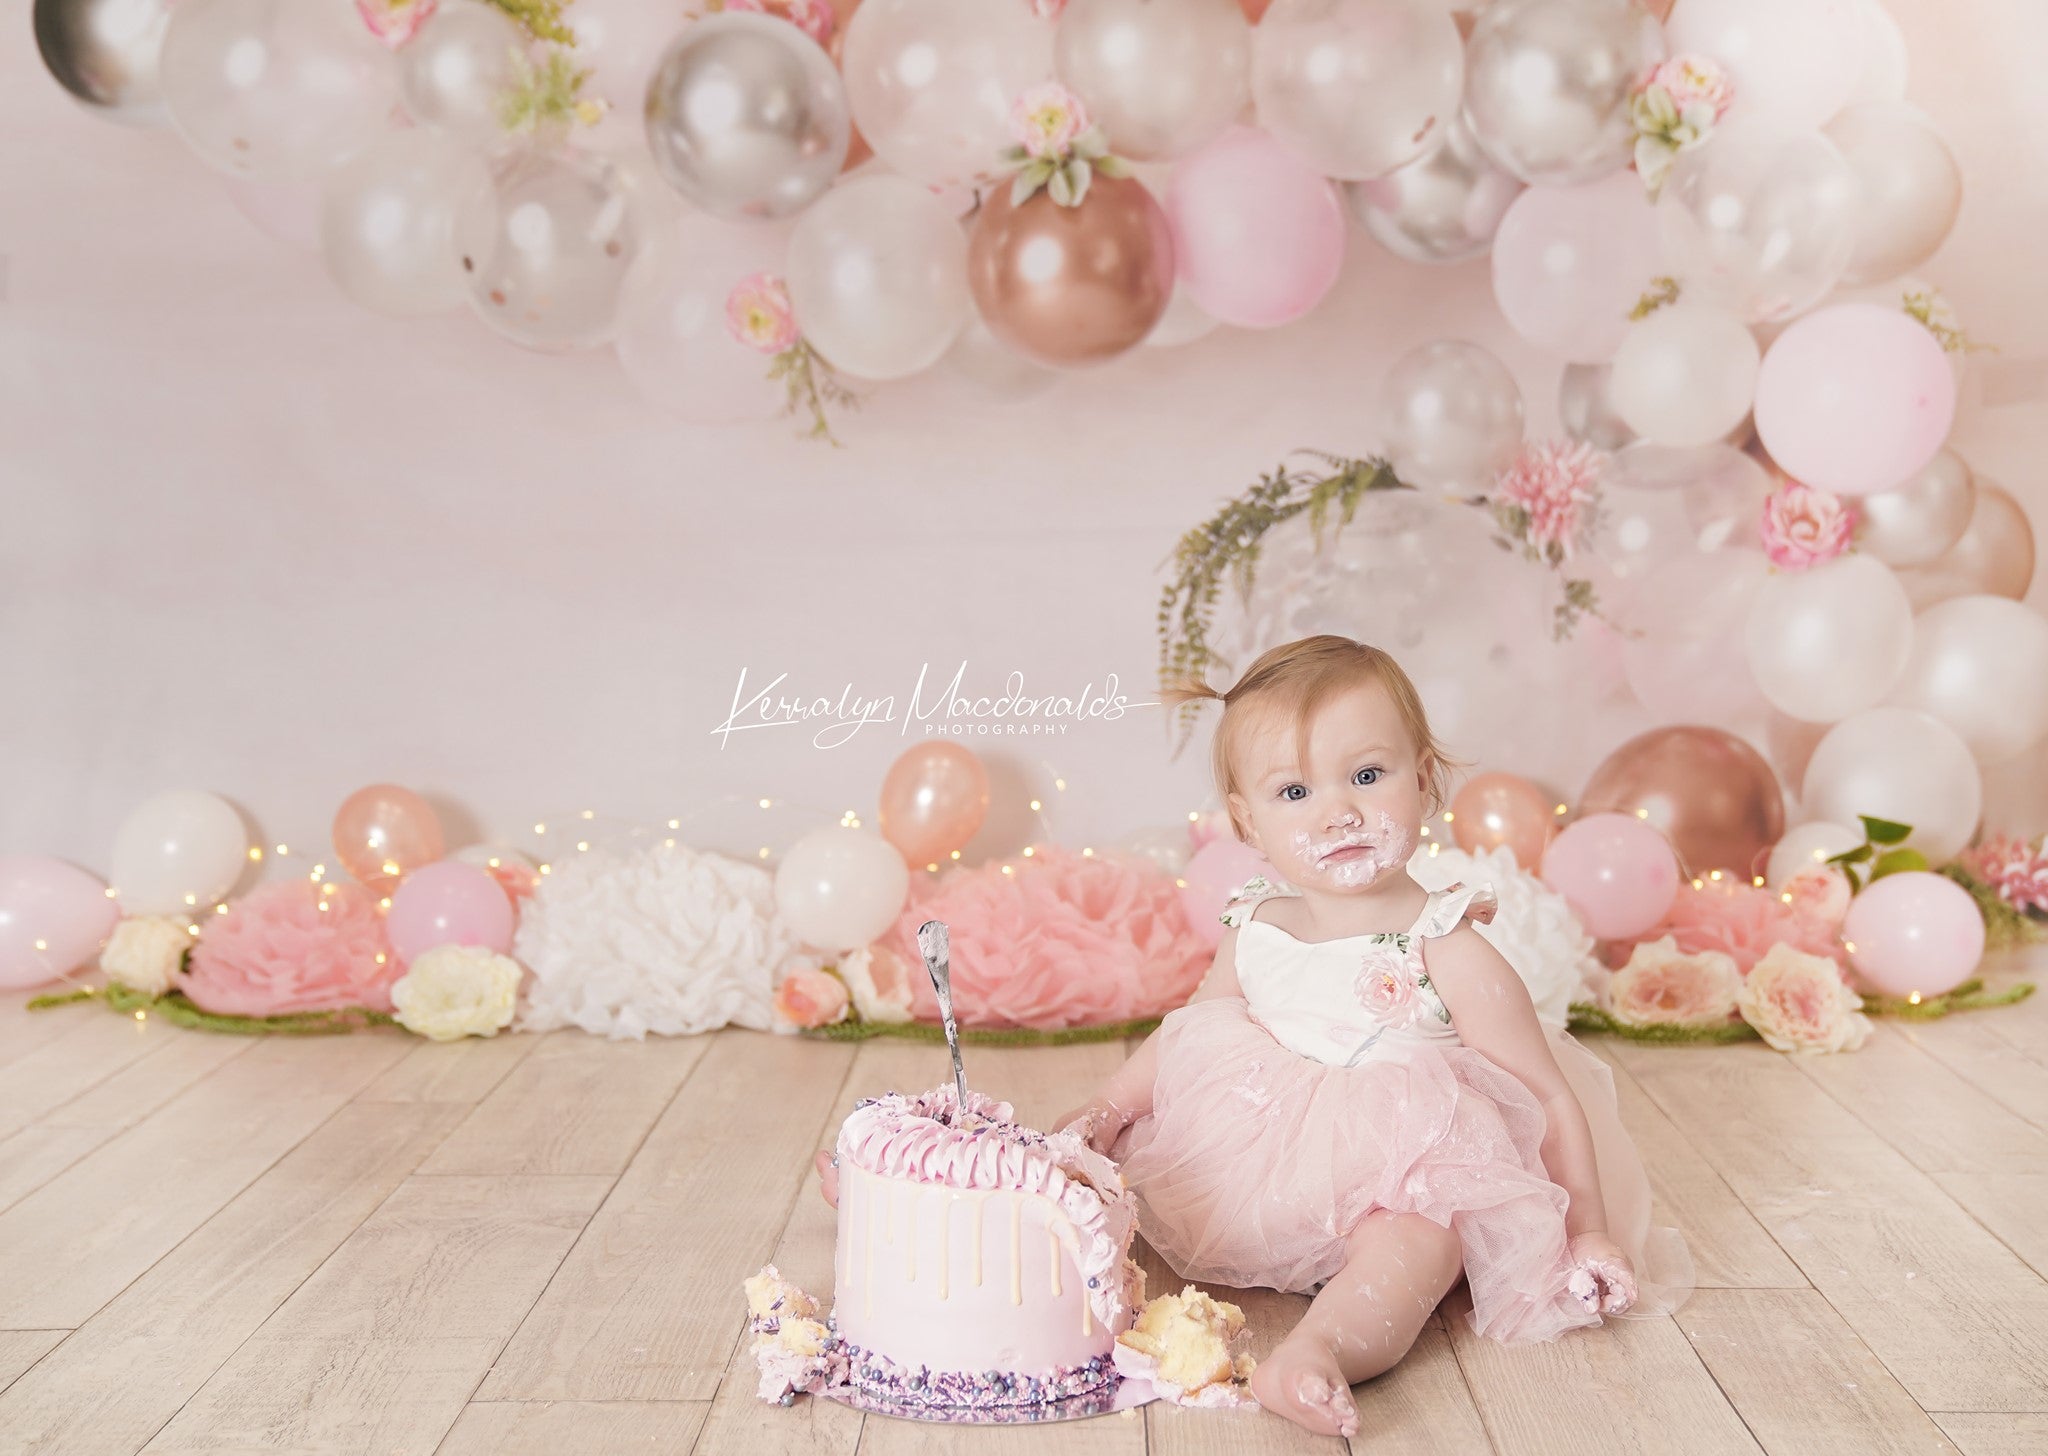 Kate Pink White and Rose Gold Floral Balloon Arch Backdrop Cake Smash Designed by Mandy Ringe Photography